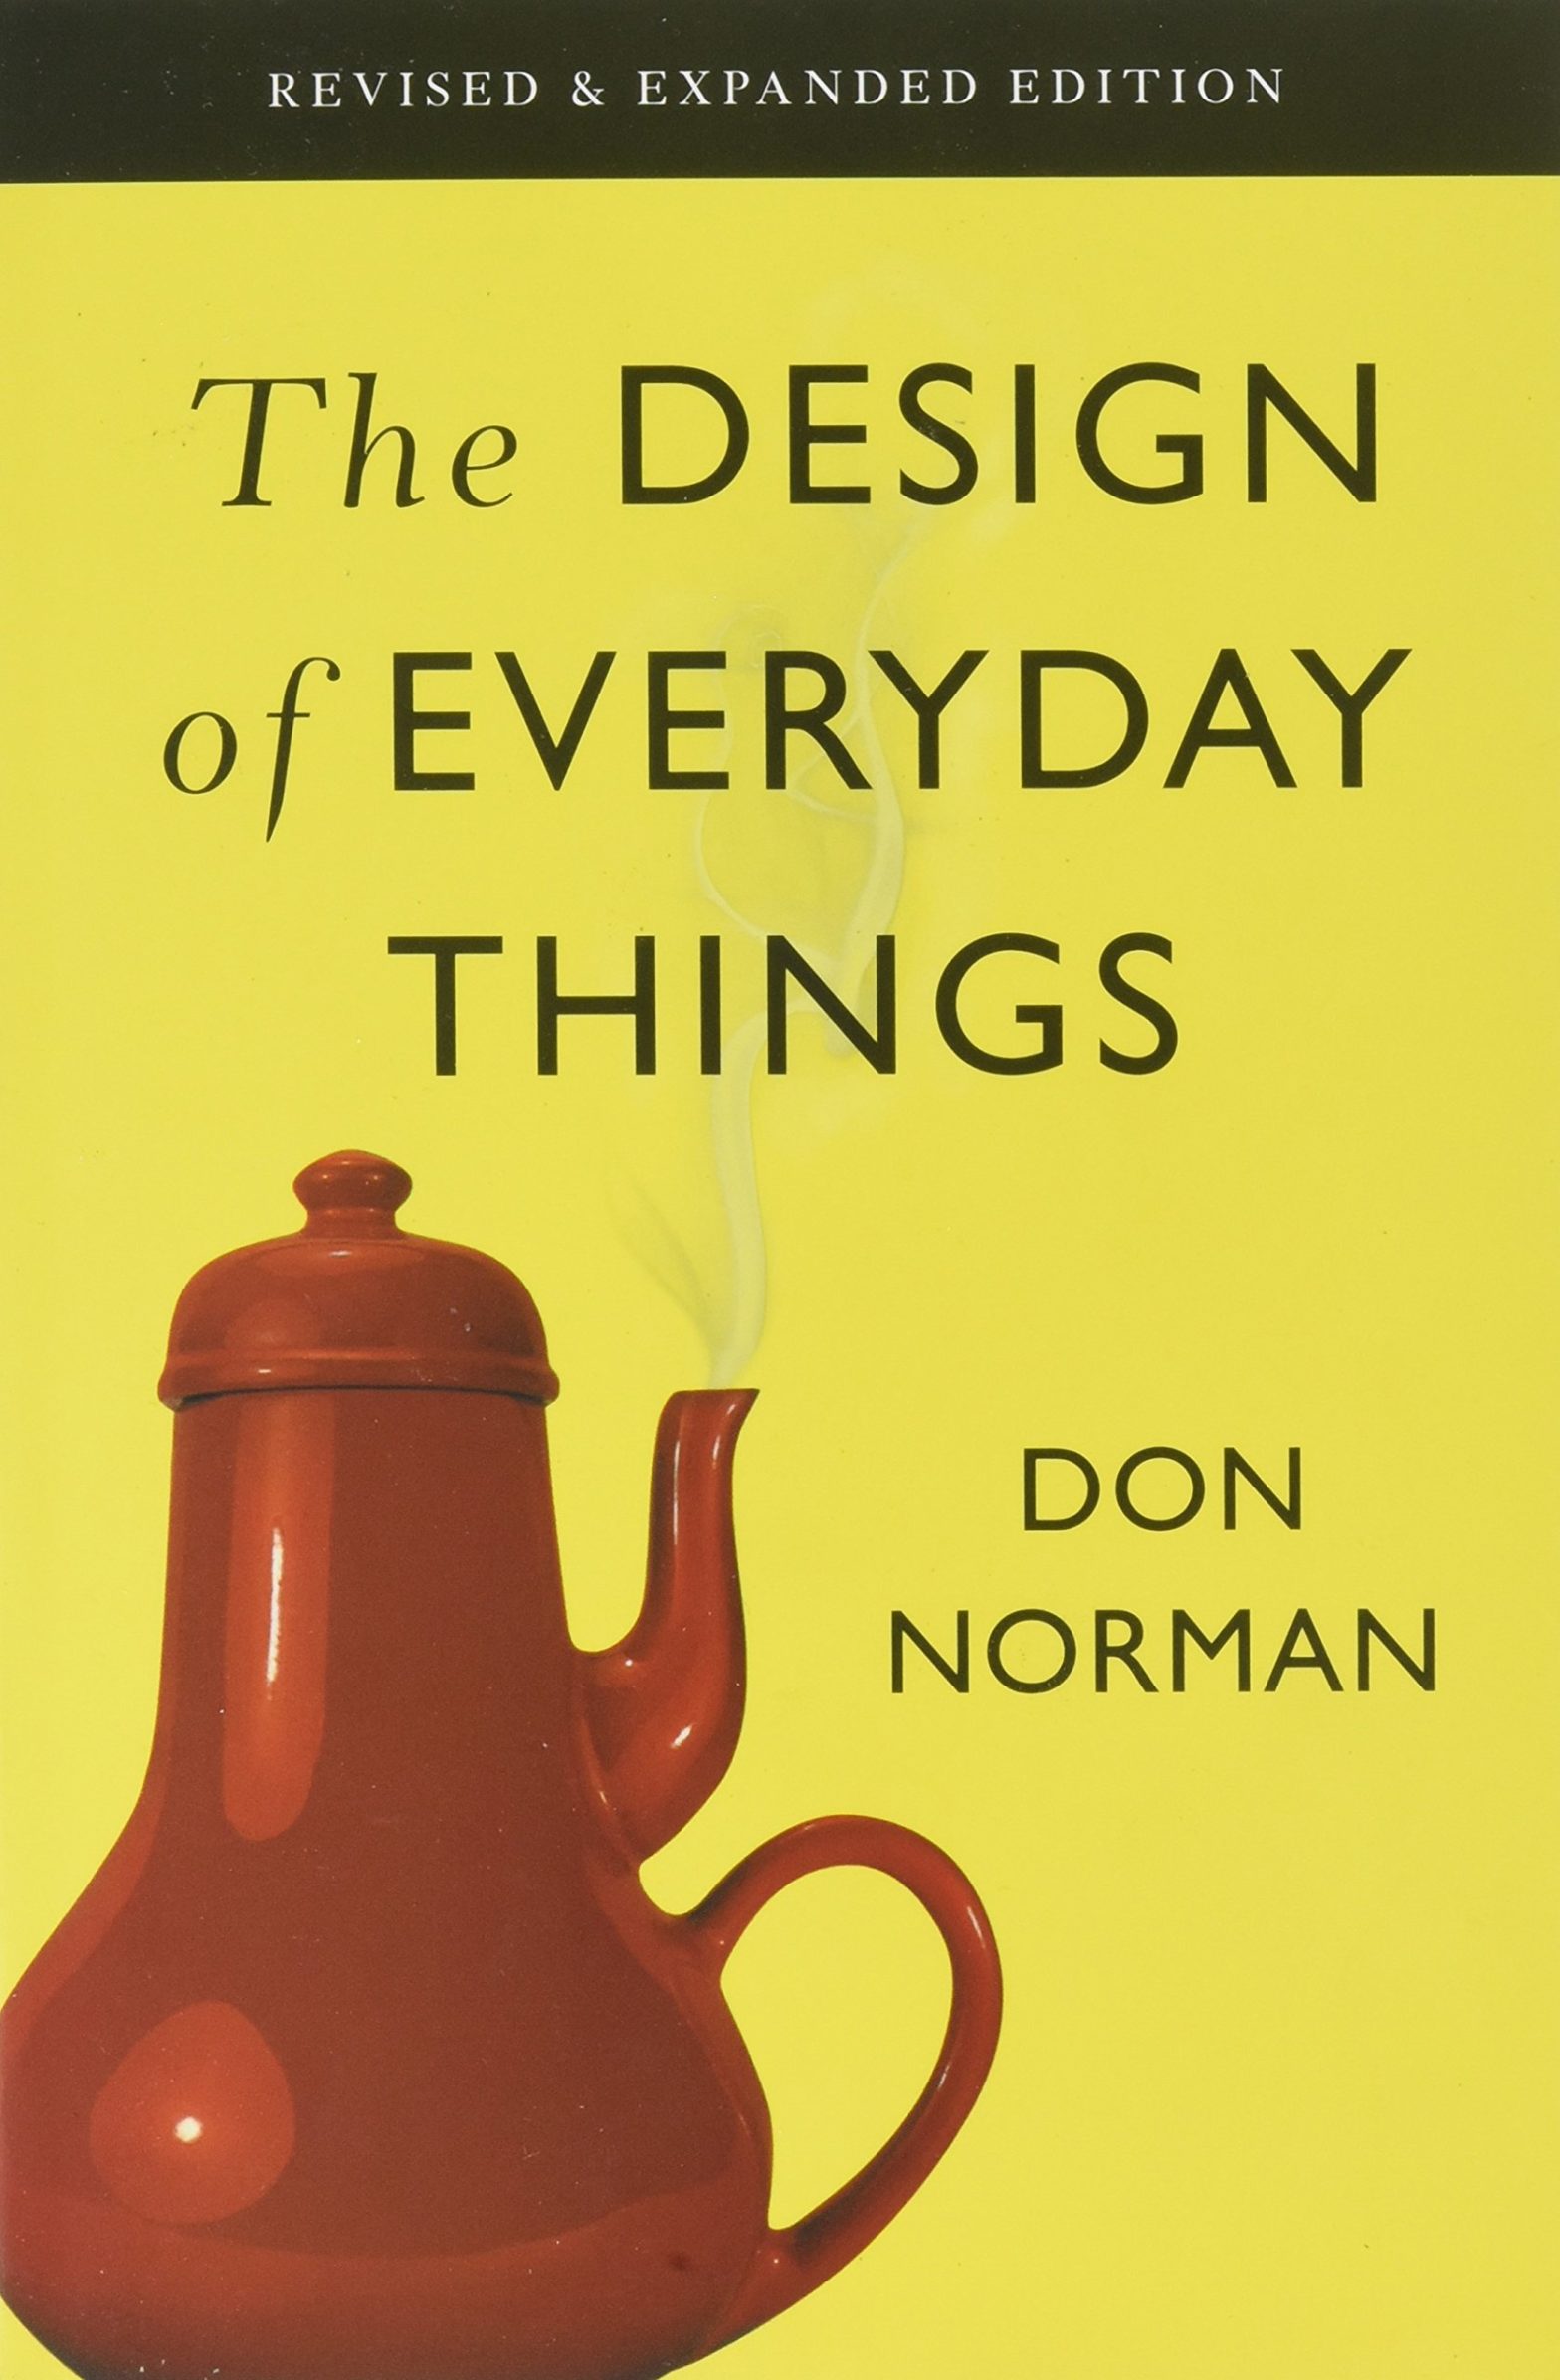 Cover image of The Design of Everyday Things by Don Norman